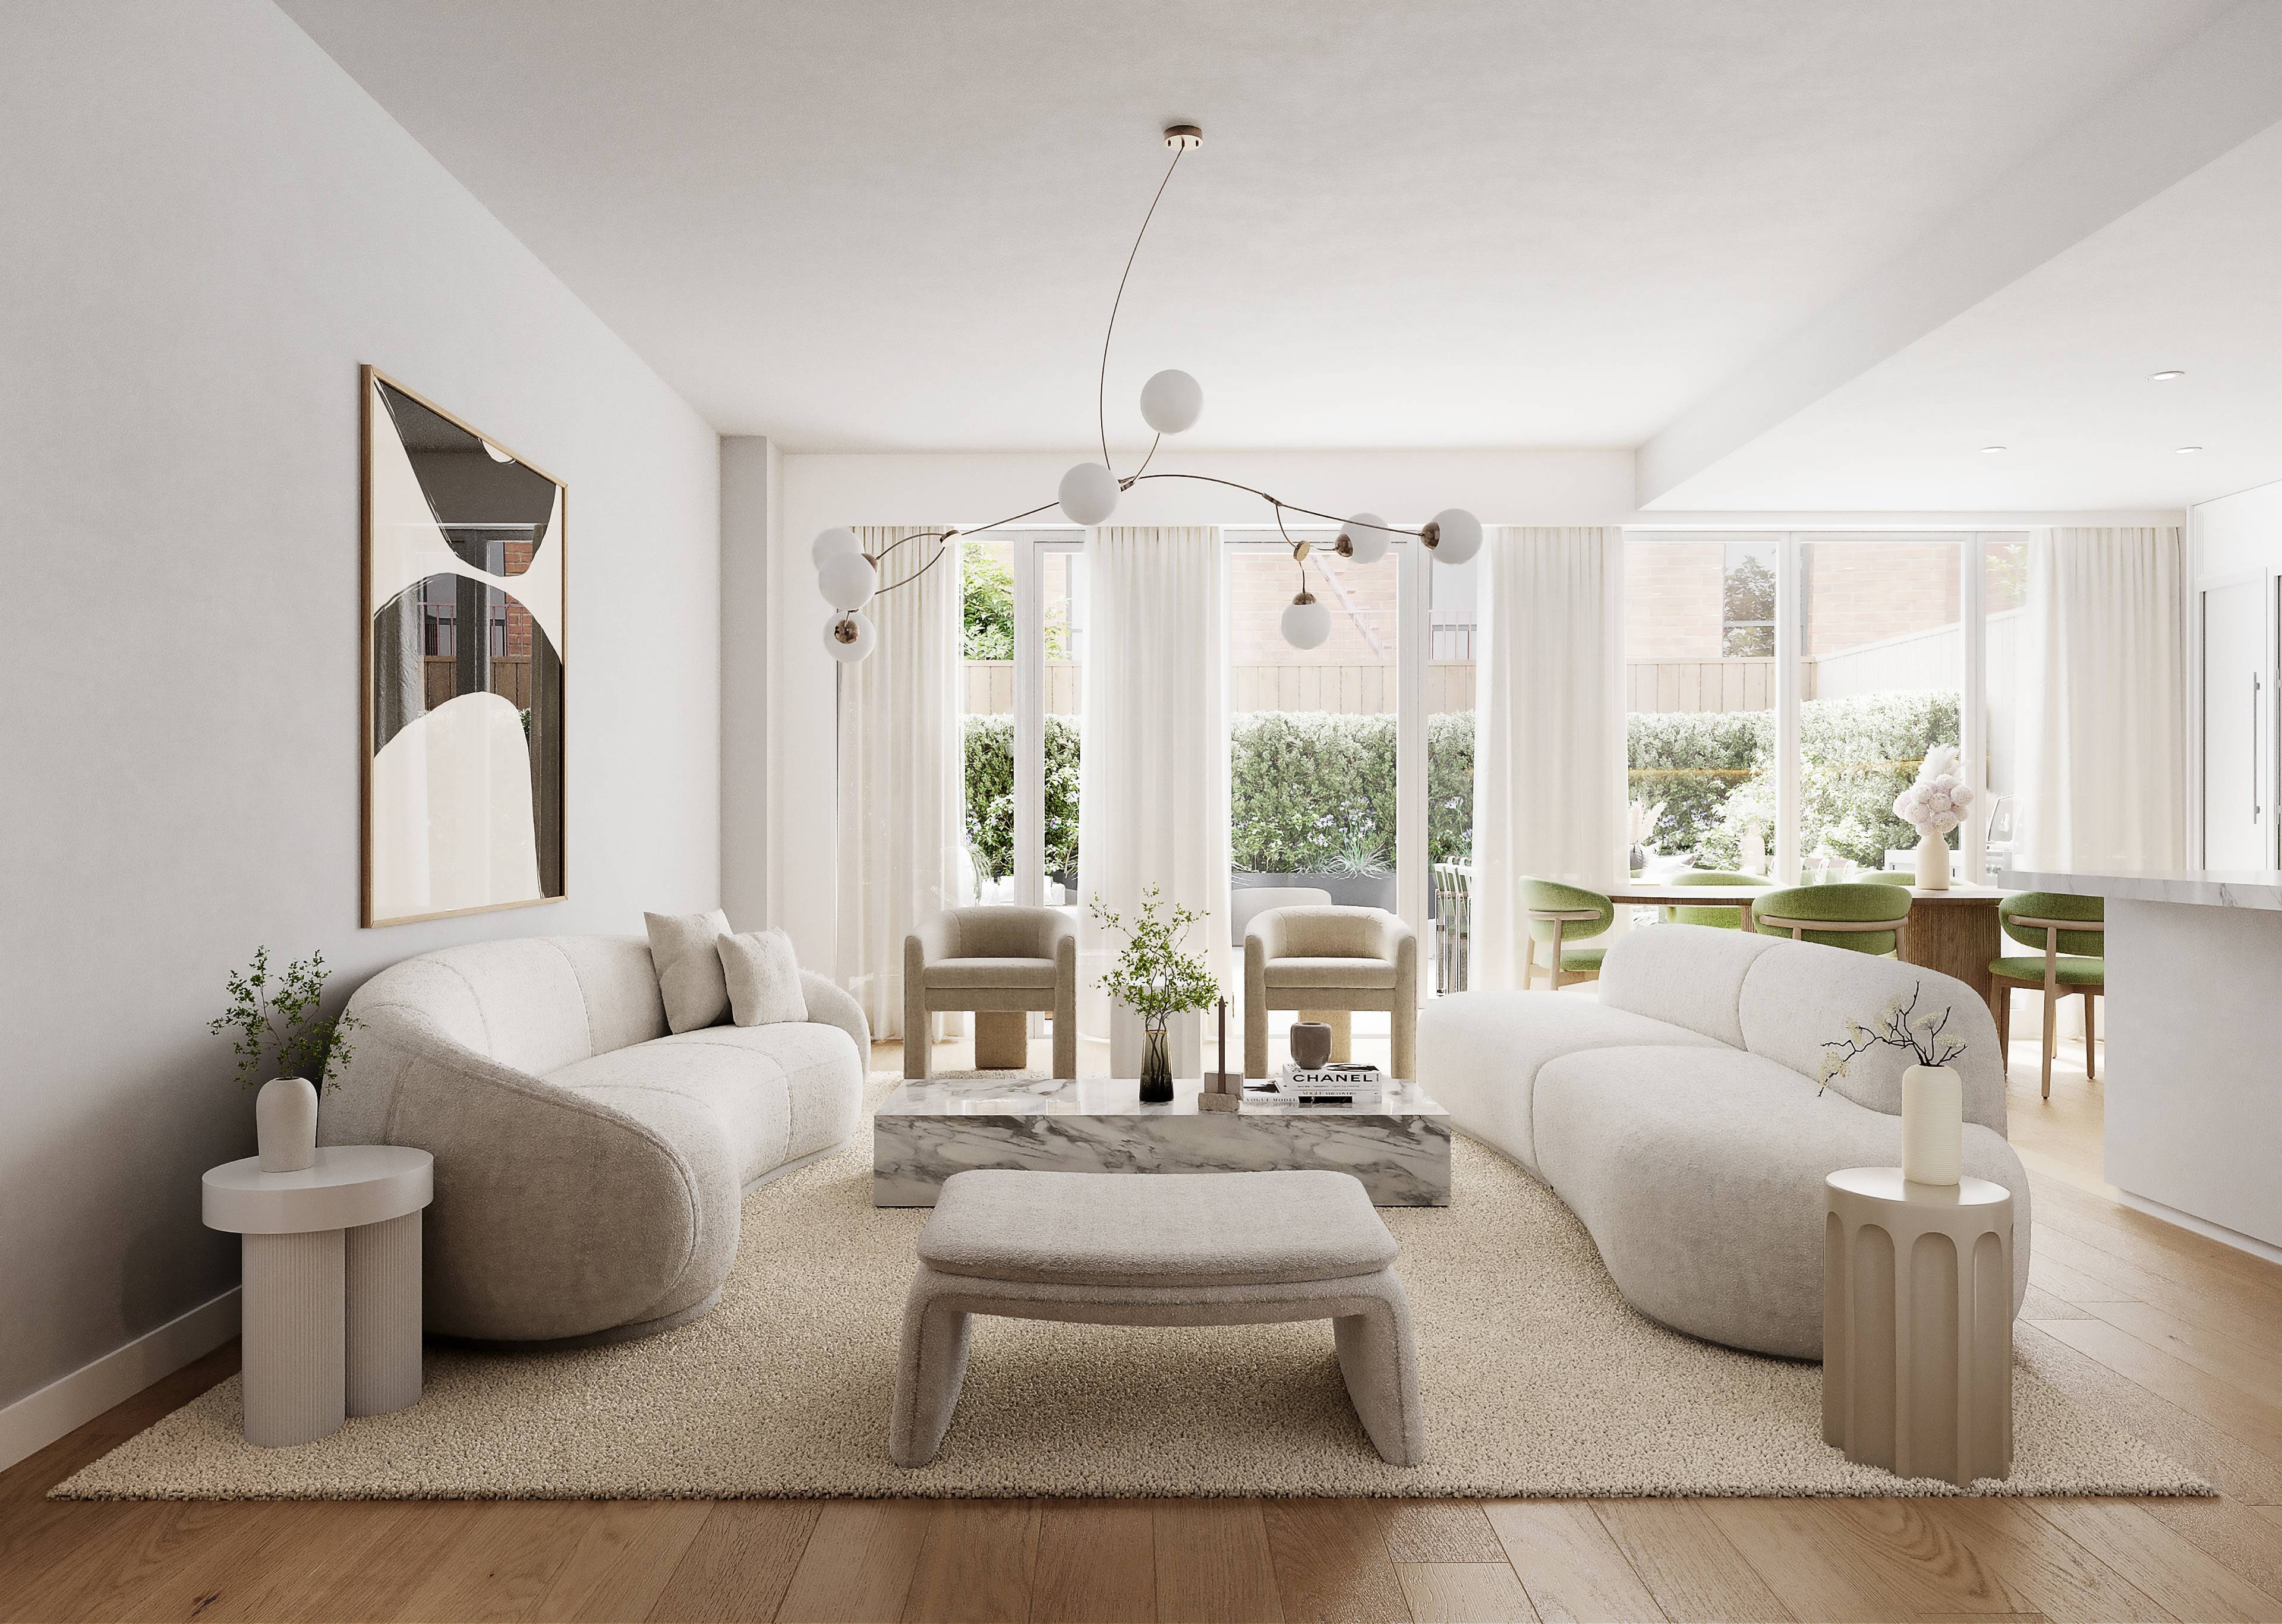 LUXURY NEW DEVELOPMENT IN THE HEART OF THE UPPER EAST SIDE